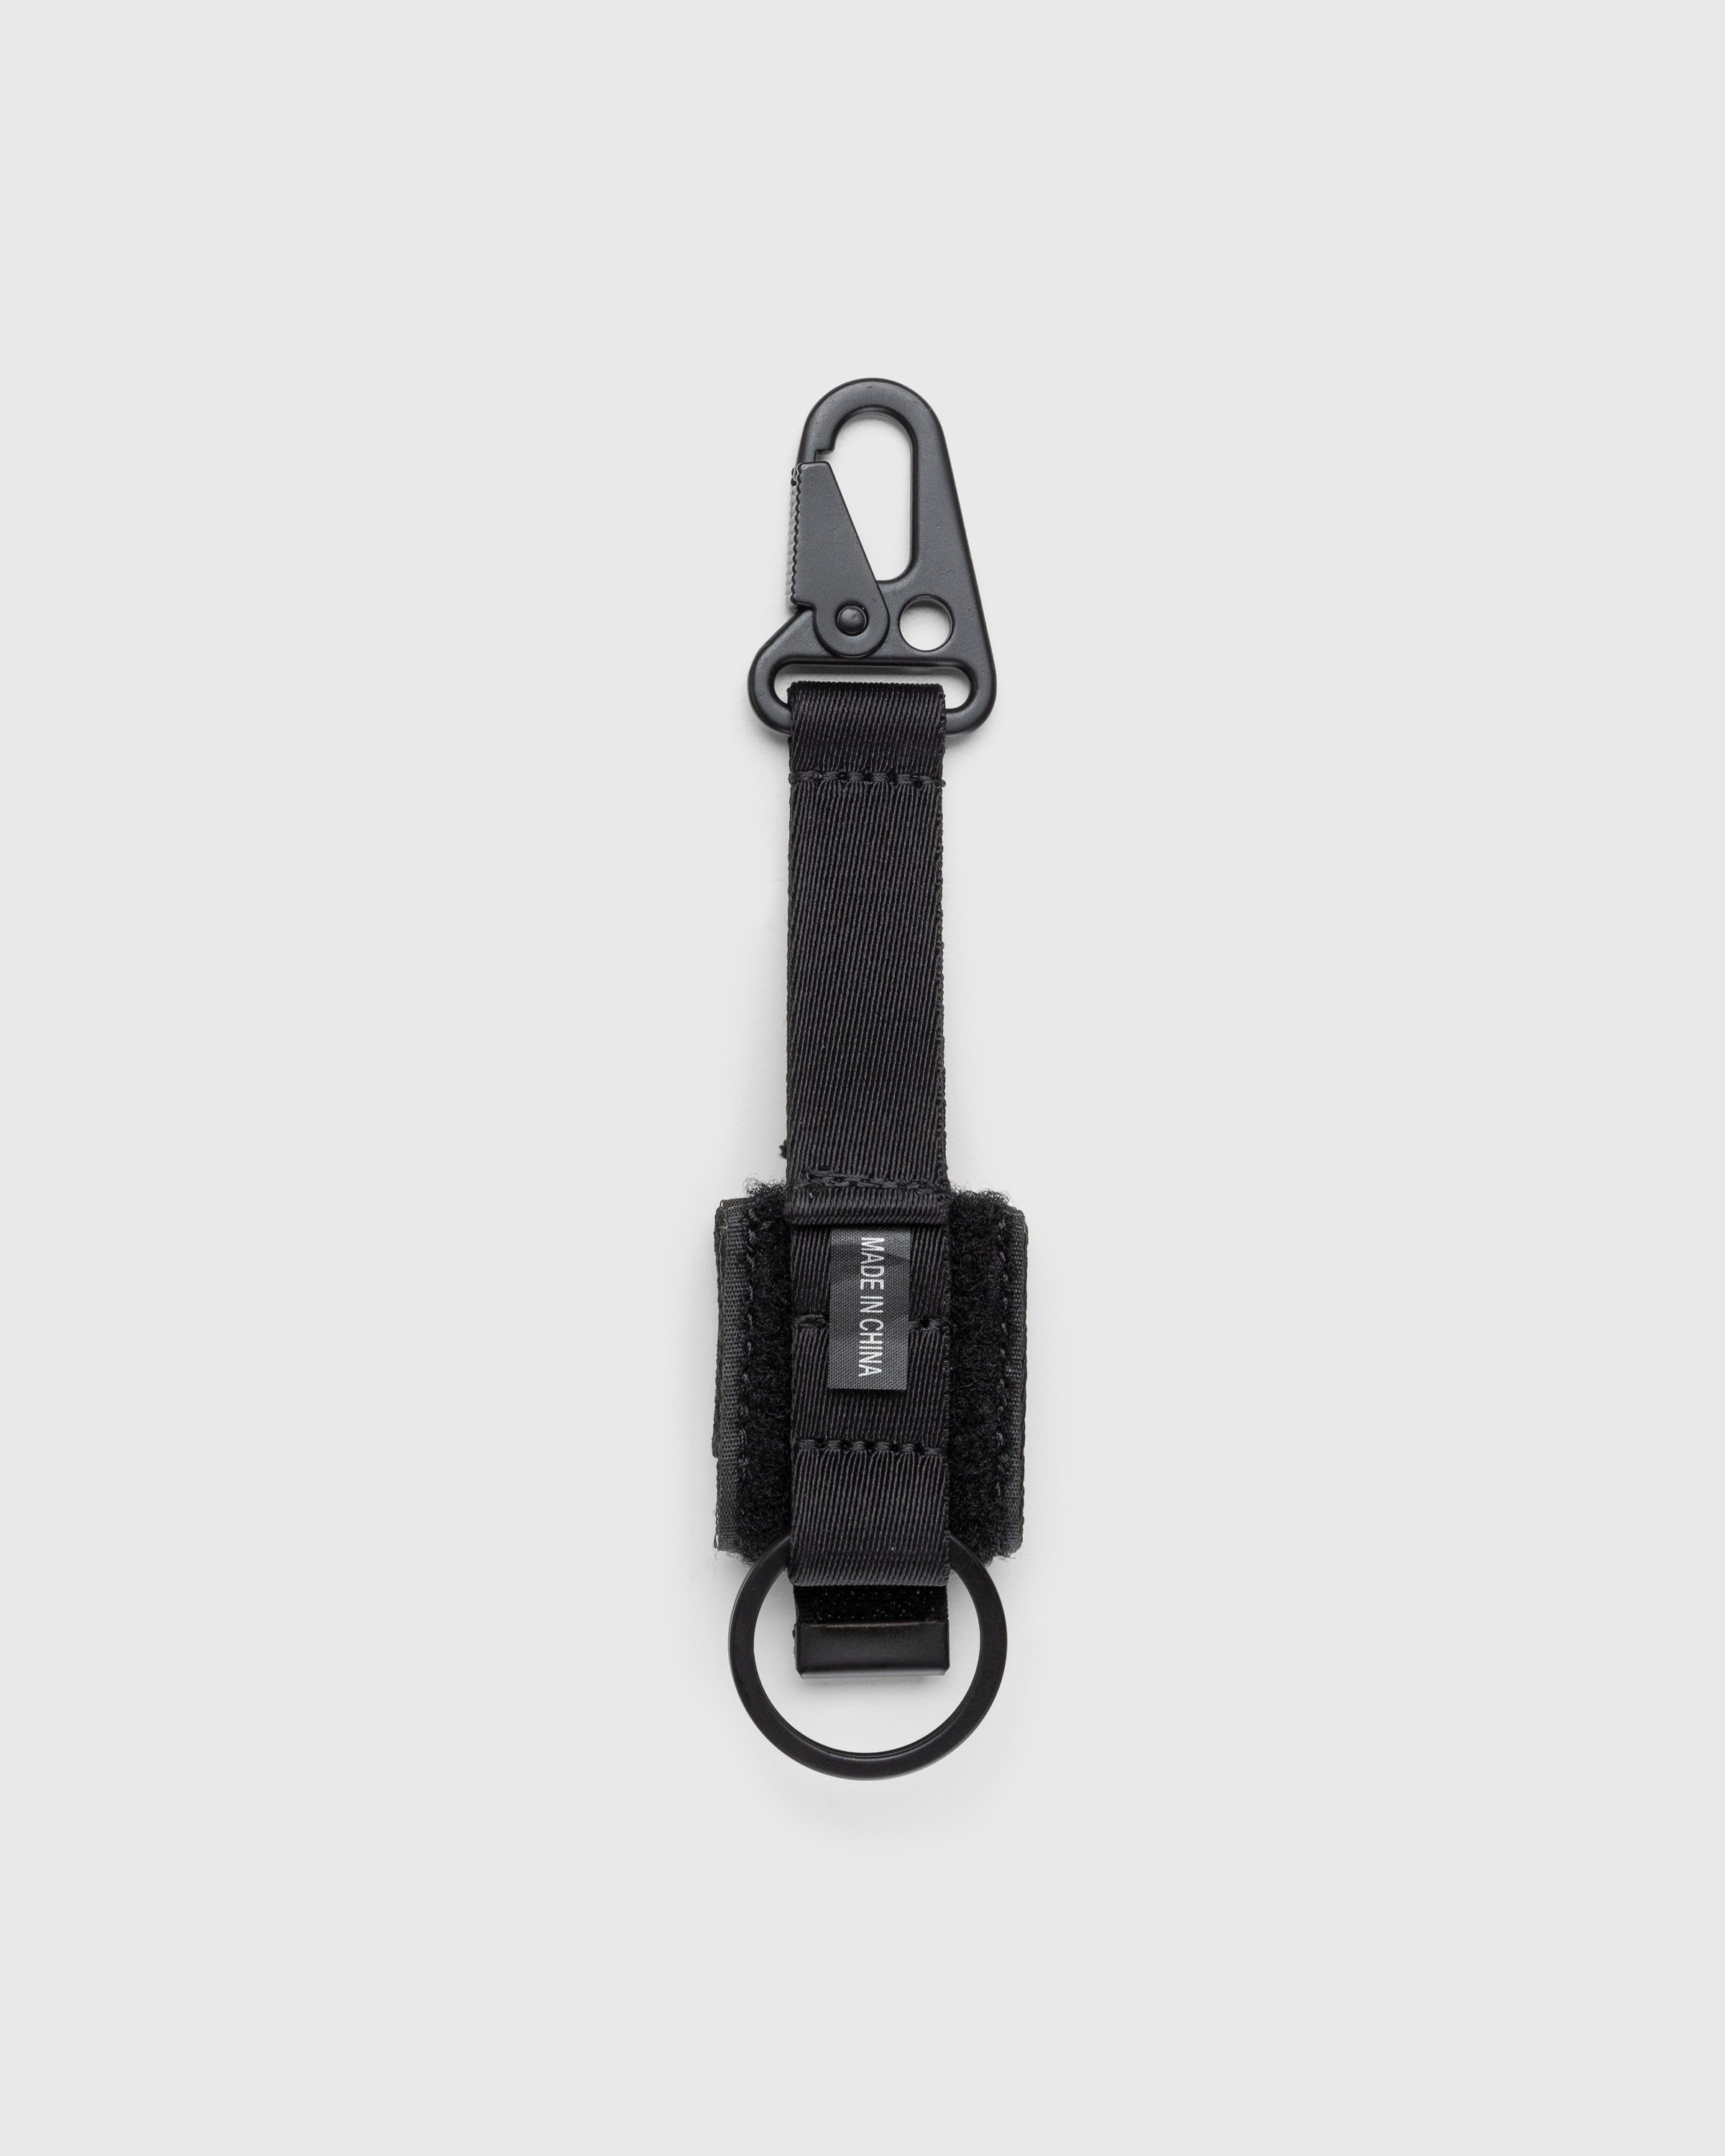 Stone Island – AirPods Case With Key Holder Black - Air Pod Cases - Black - Image 2